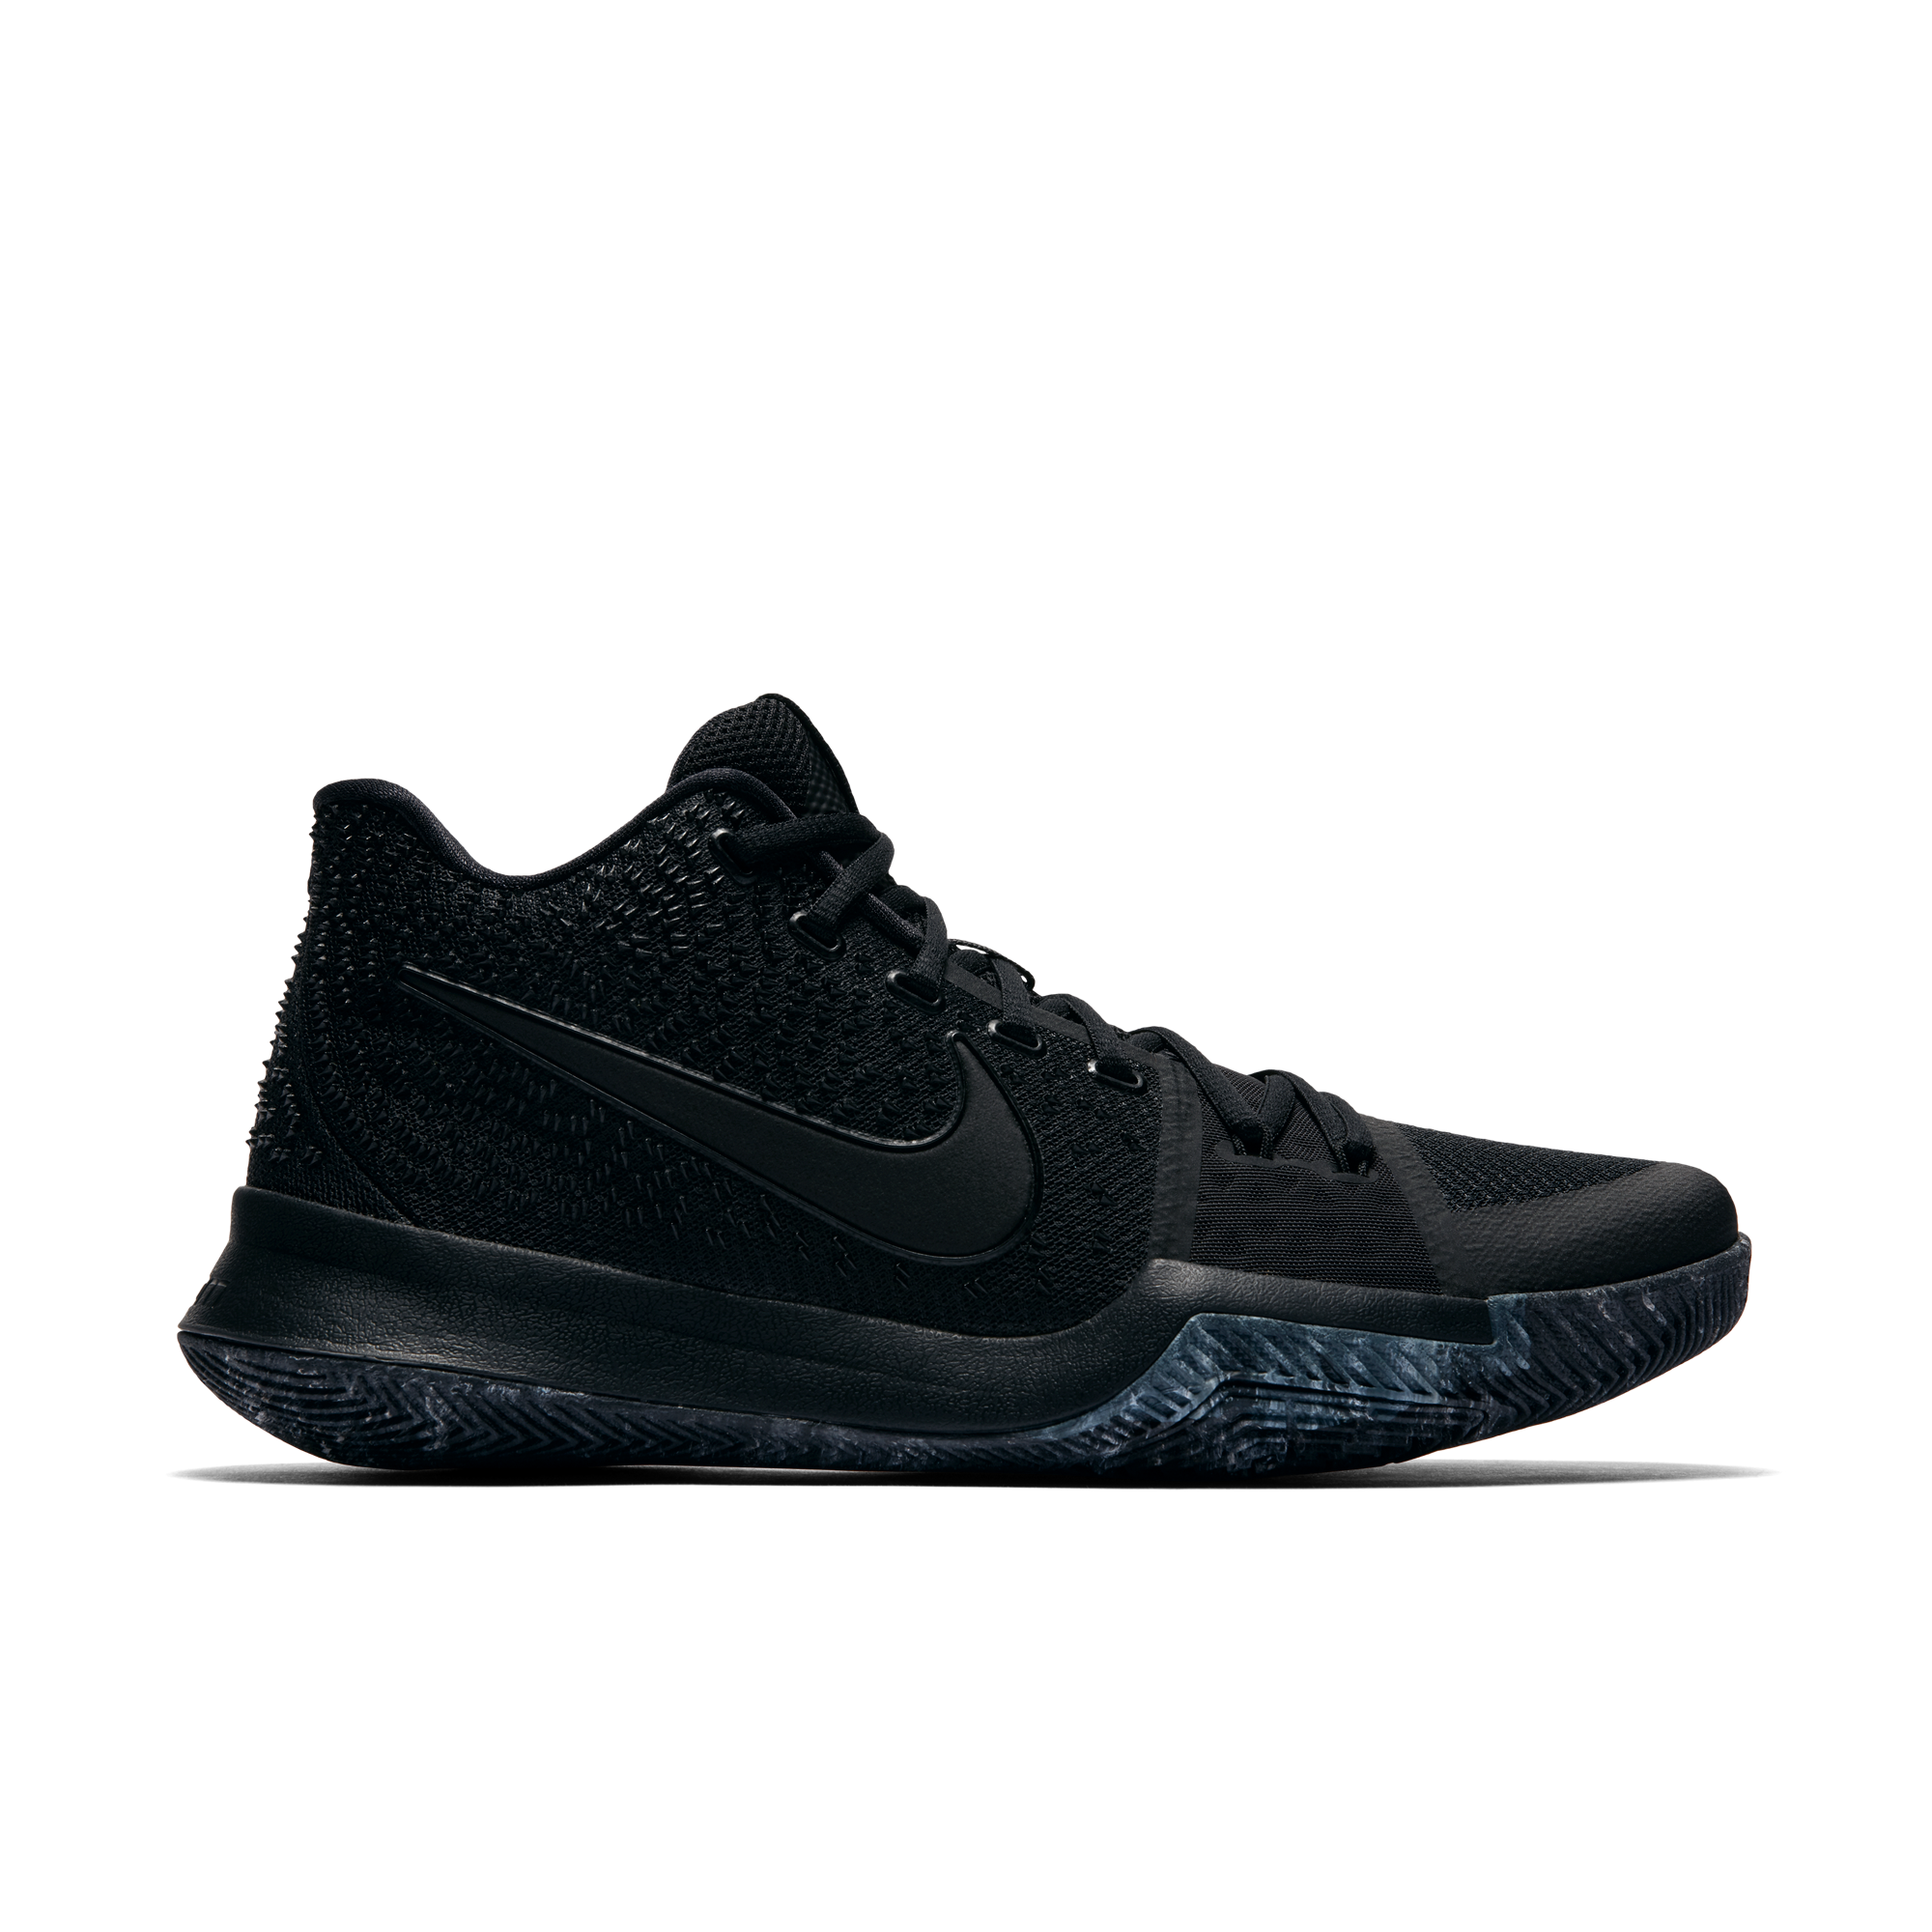 kyrie shoes all black